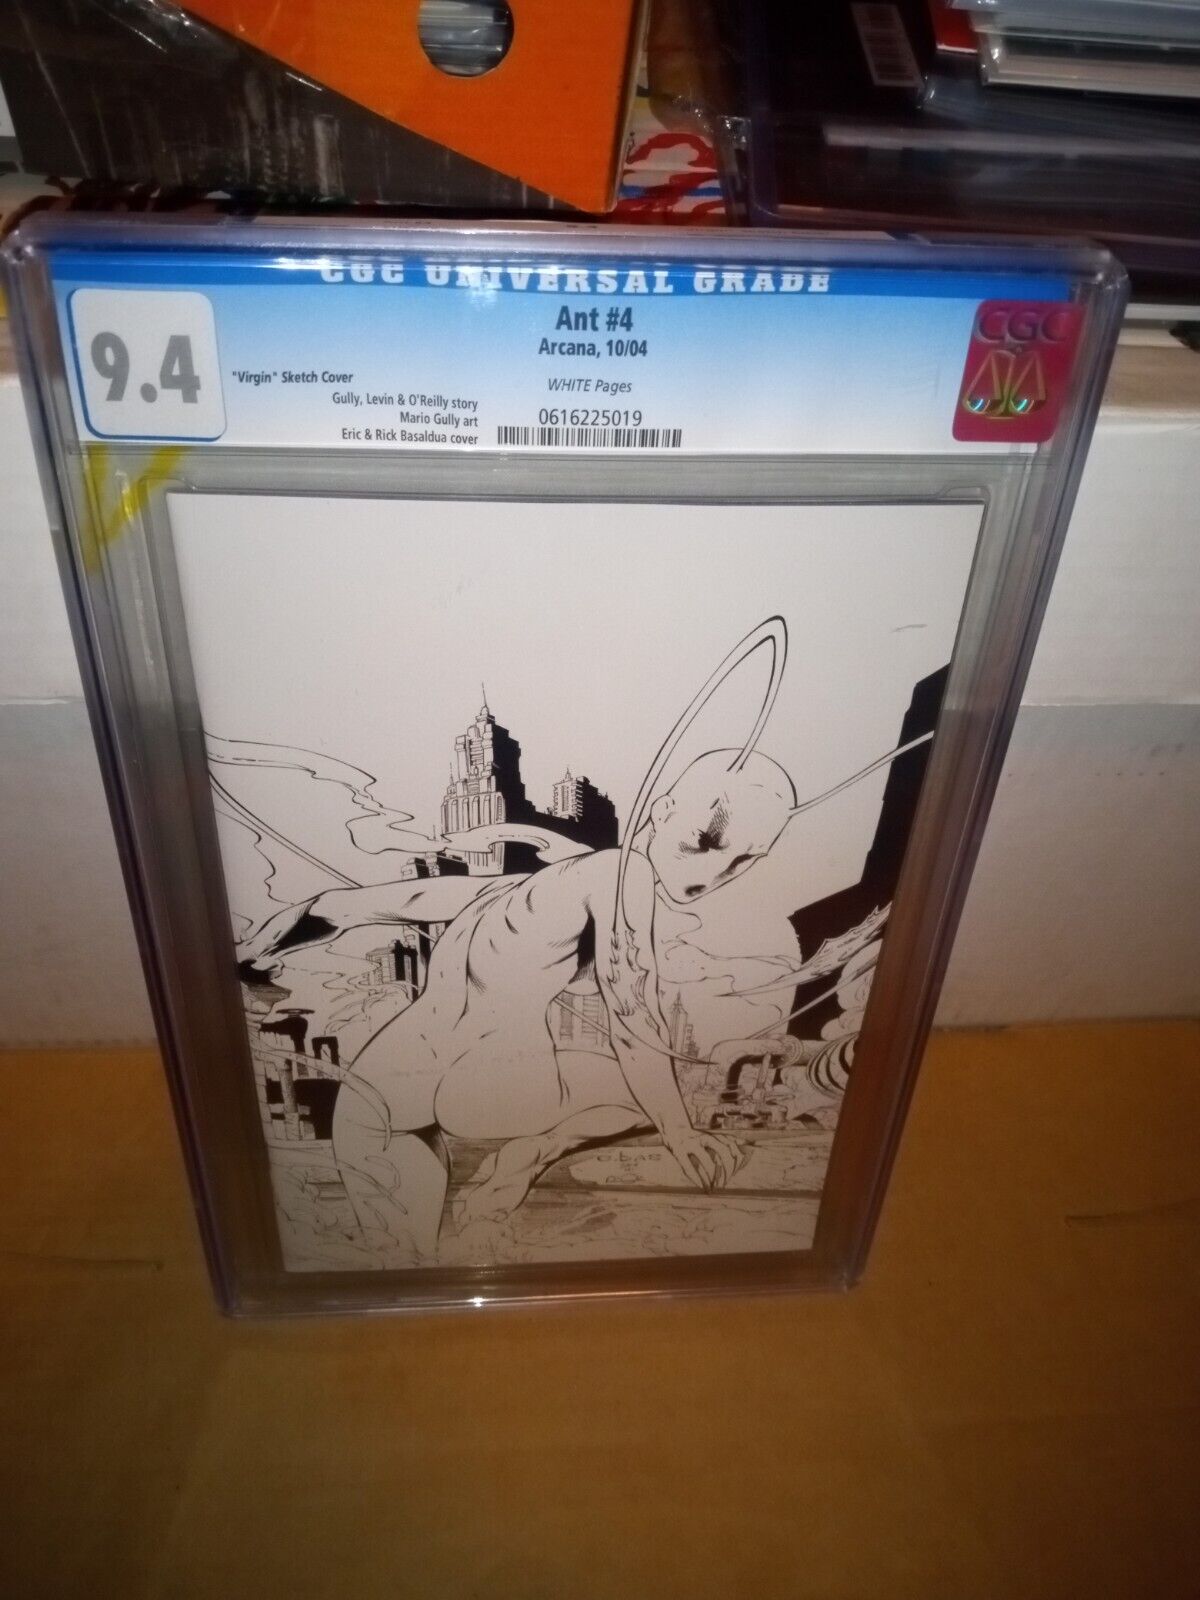 Arcana (2004) Ant Volume 1 Issue 4 Virgin Sketch Cover CGC 9.4